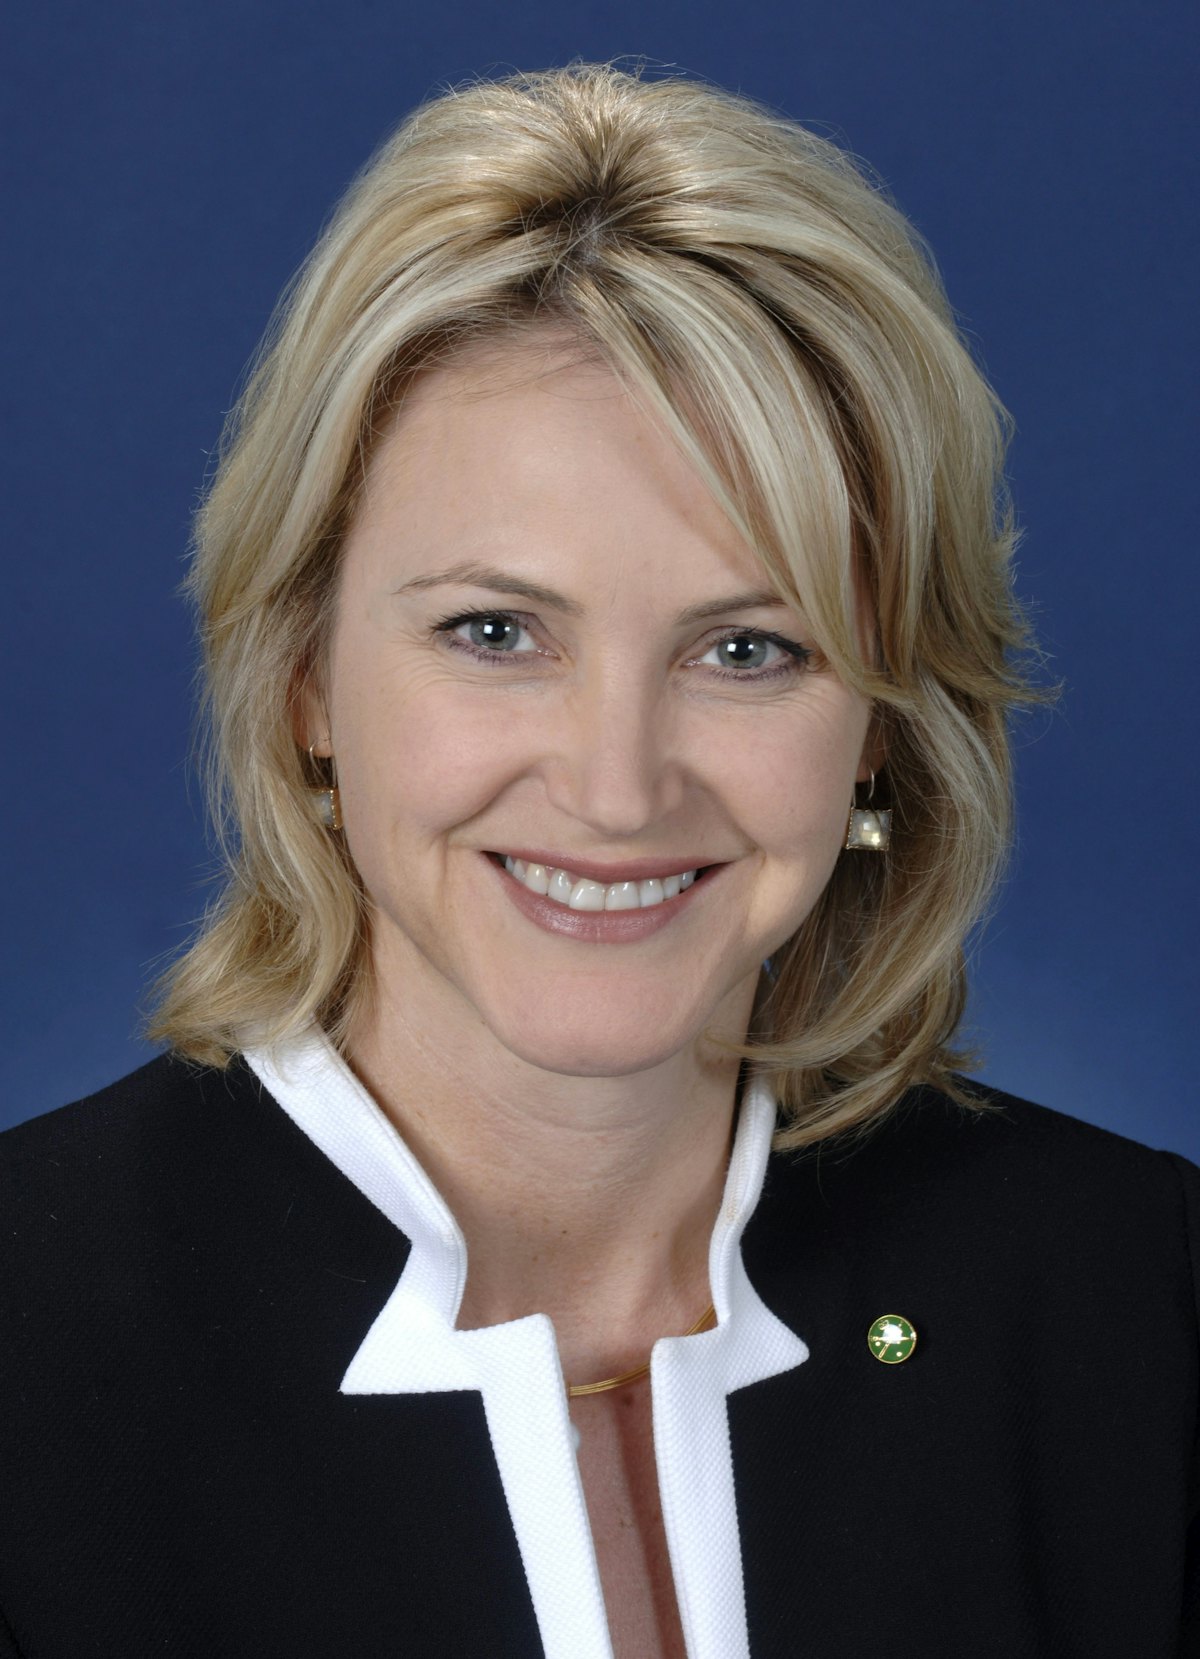 Melissa Parke – the Member of Parliament for Fremantle – who moved the motion debated by Australia's House of Representatives on 13 February 2012. Ms. Parke said it is "difficult to understand the degree of hostility by the authorities in Iran" towards Baha'is.